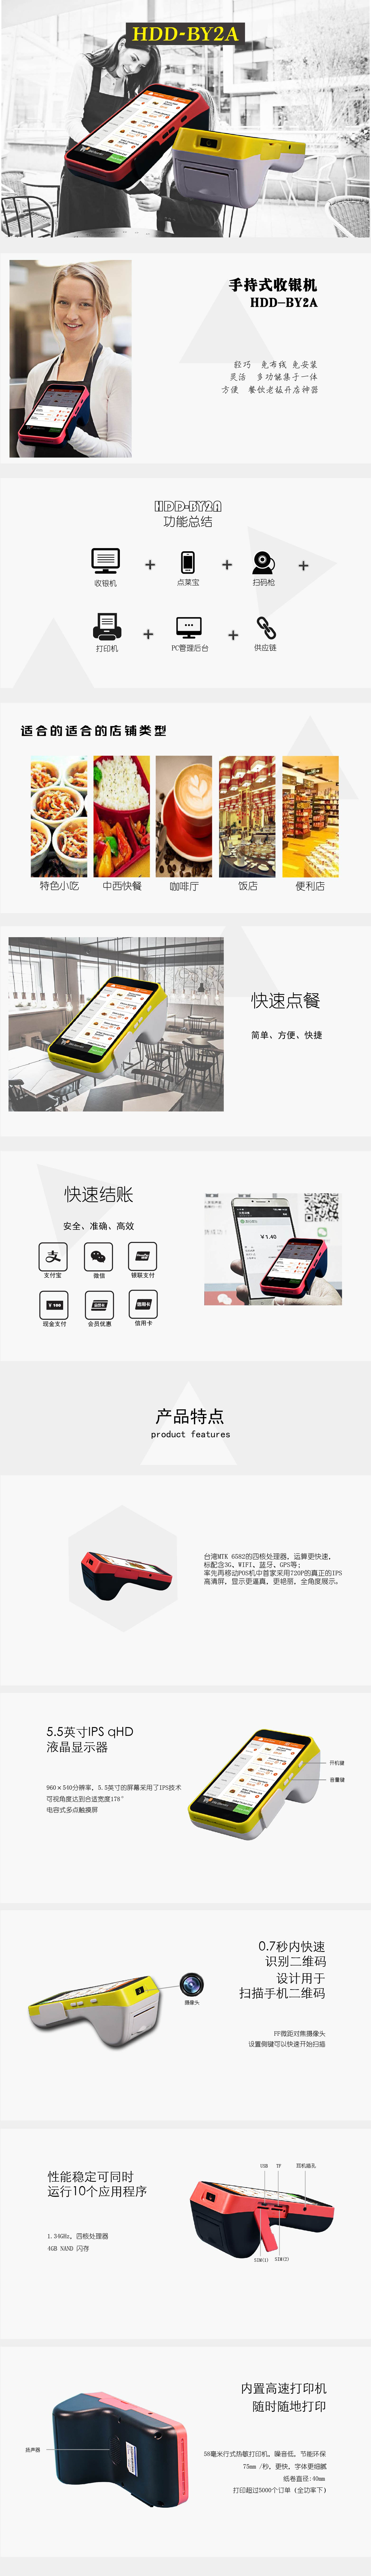 ag真人app下载（/999/product/hdd-by2a-android-pos-thermal-printer.html）